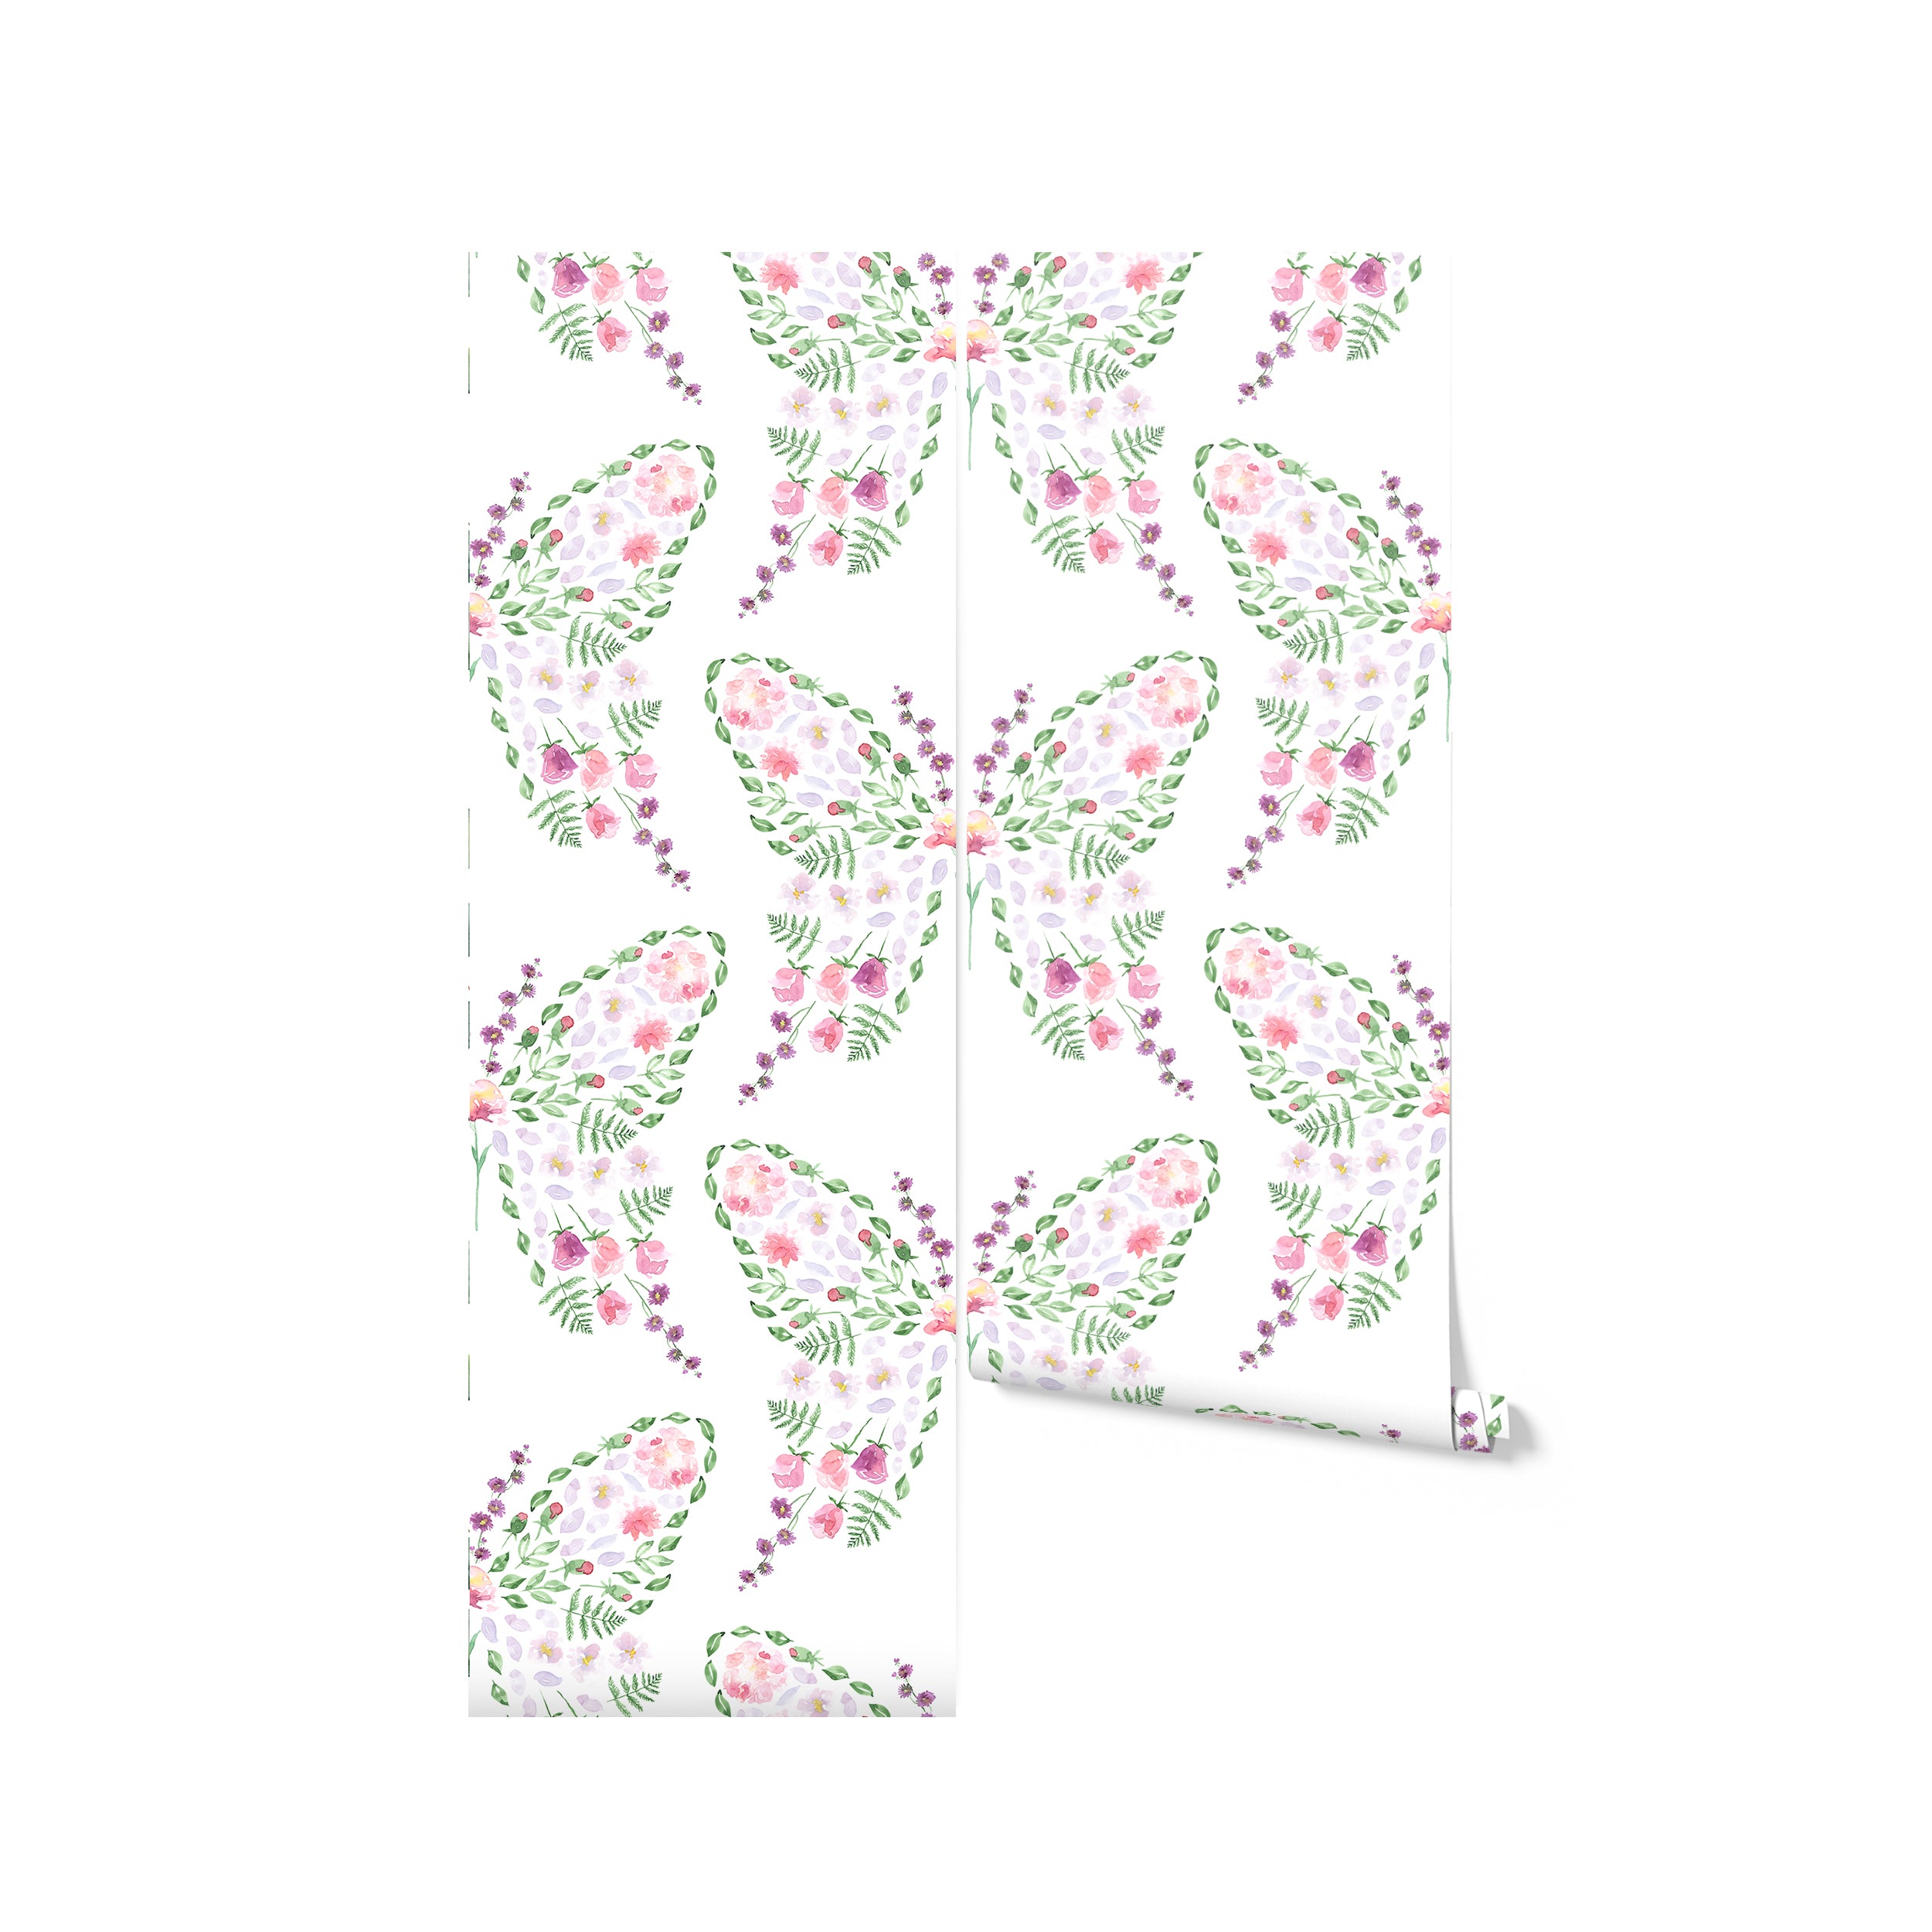 A roll of kids' wallpaper unfurled slightly to show a charming pattern of watercolor butterflies composed of floral and leaf designs in pastel pink, purple, and green tones, conveying a sense of whimsy and playfulness.